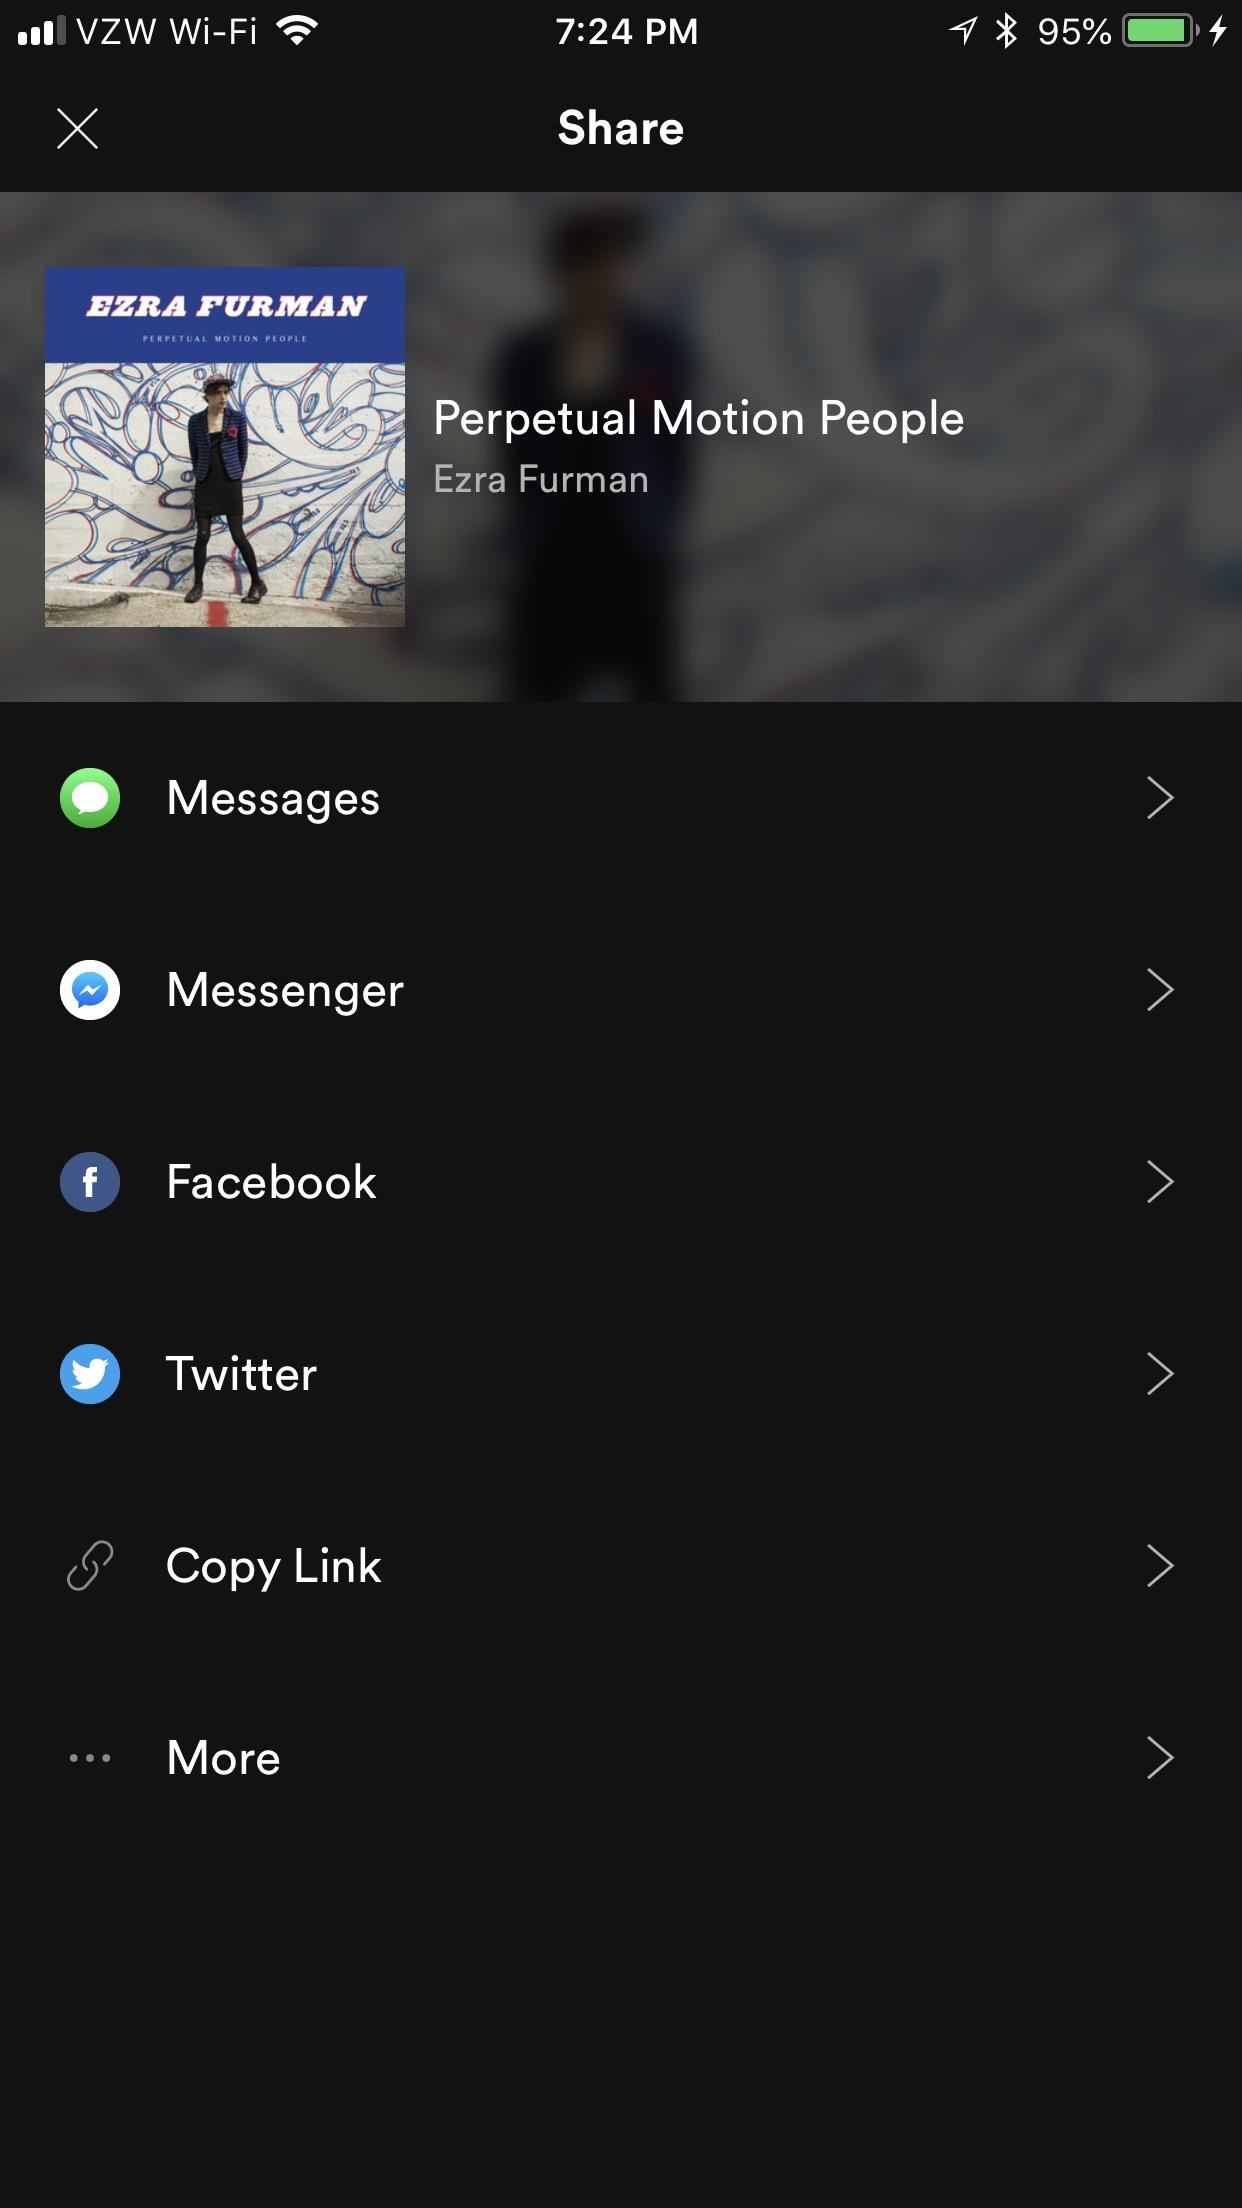 Spotify 101: How to Easily Share Music to Friends from Android & iPhone